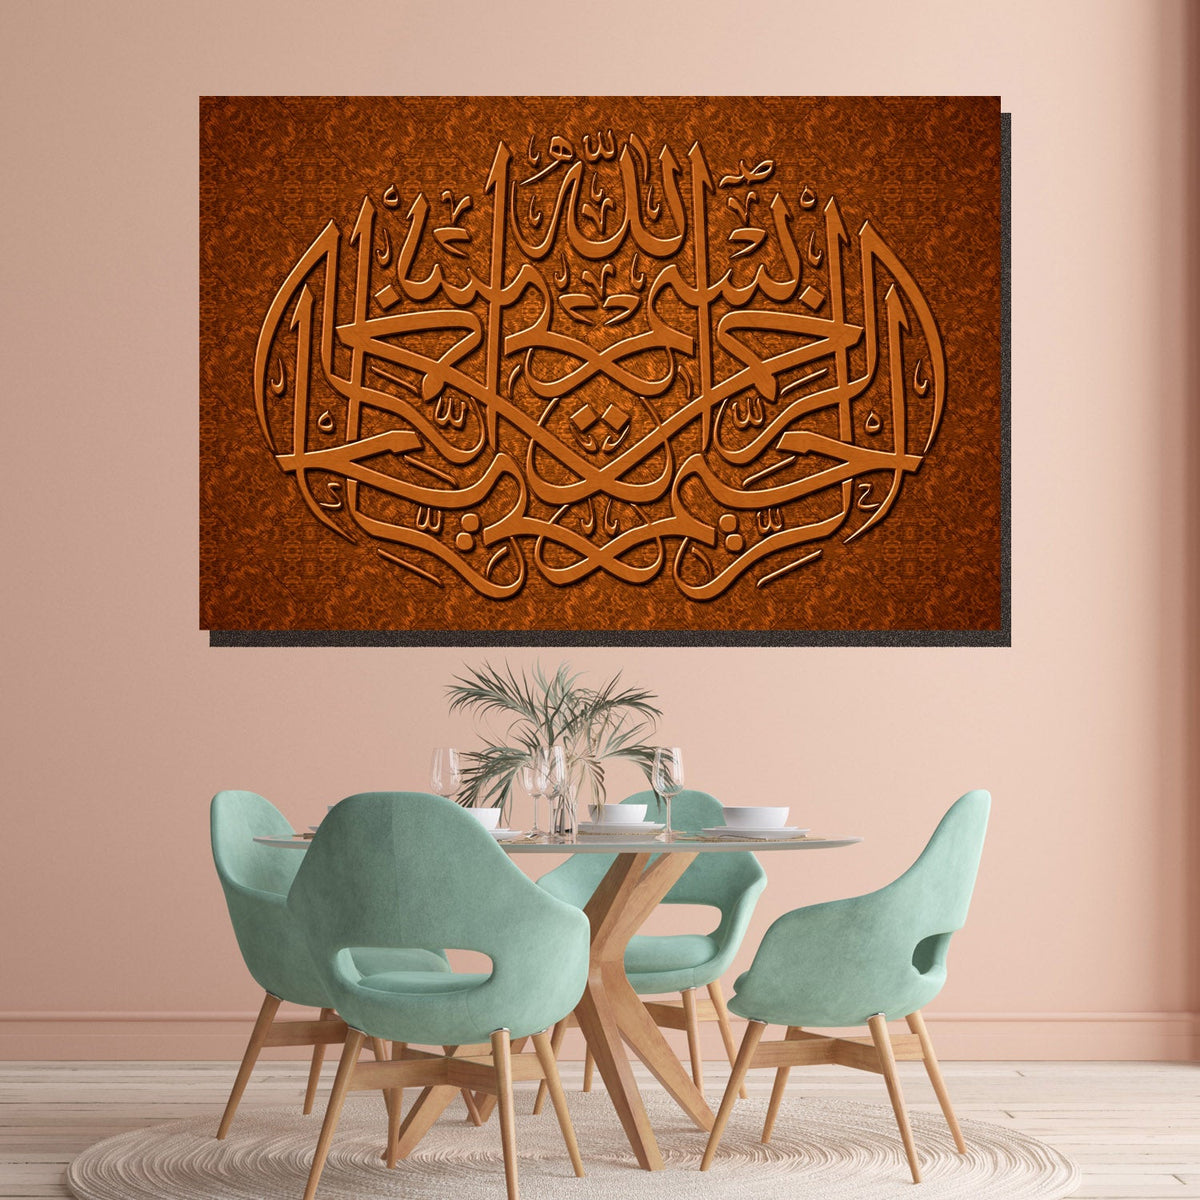 https://cdn.shopify.com/s/files/1/0387/9986/8044/products/BismallahArabicCalligraphyCanvasArtprintStretched-2.jpg